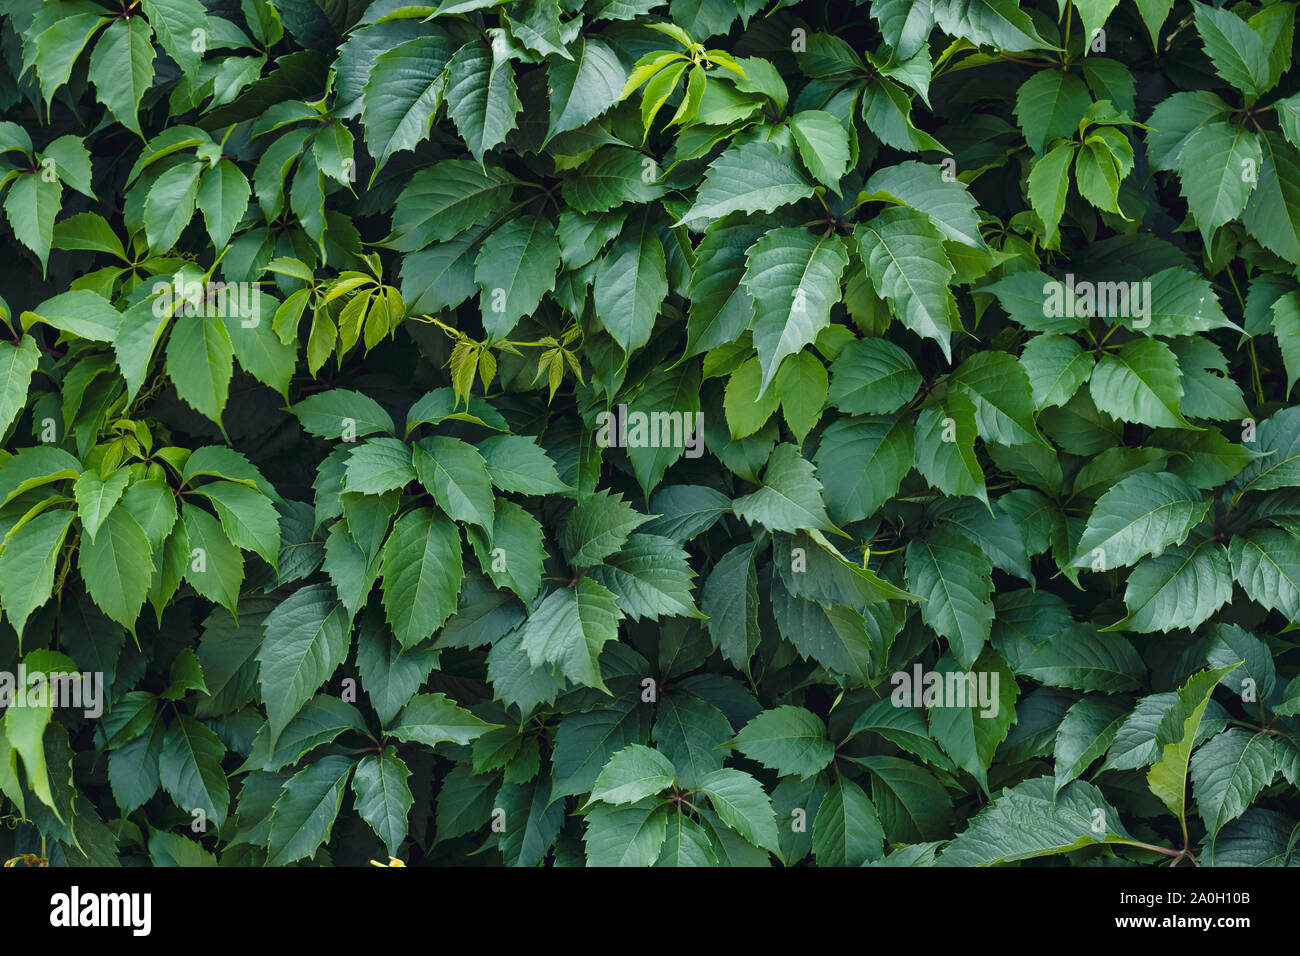 Leaf natural pattern, texture. Ampelopsis Parthenocissus Planch. Vitis, quinquefolia creeper vine. Background of green leaves creepers on wall. Wild v Stock Photo